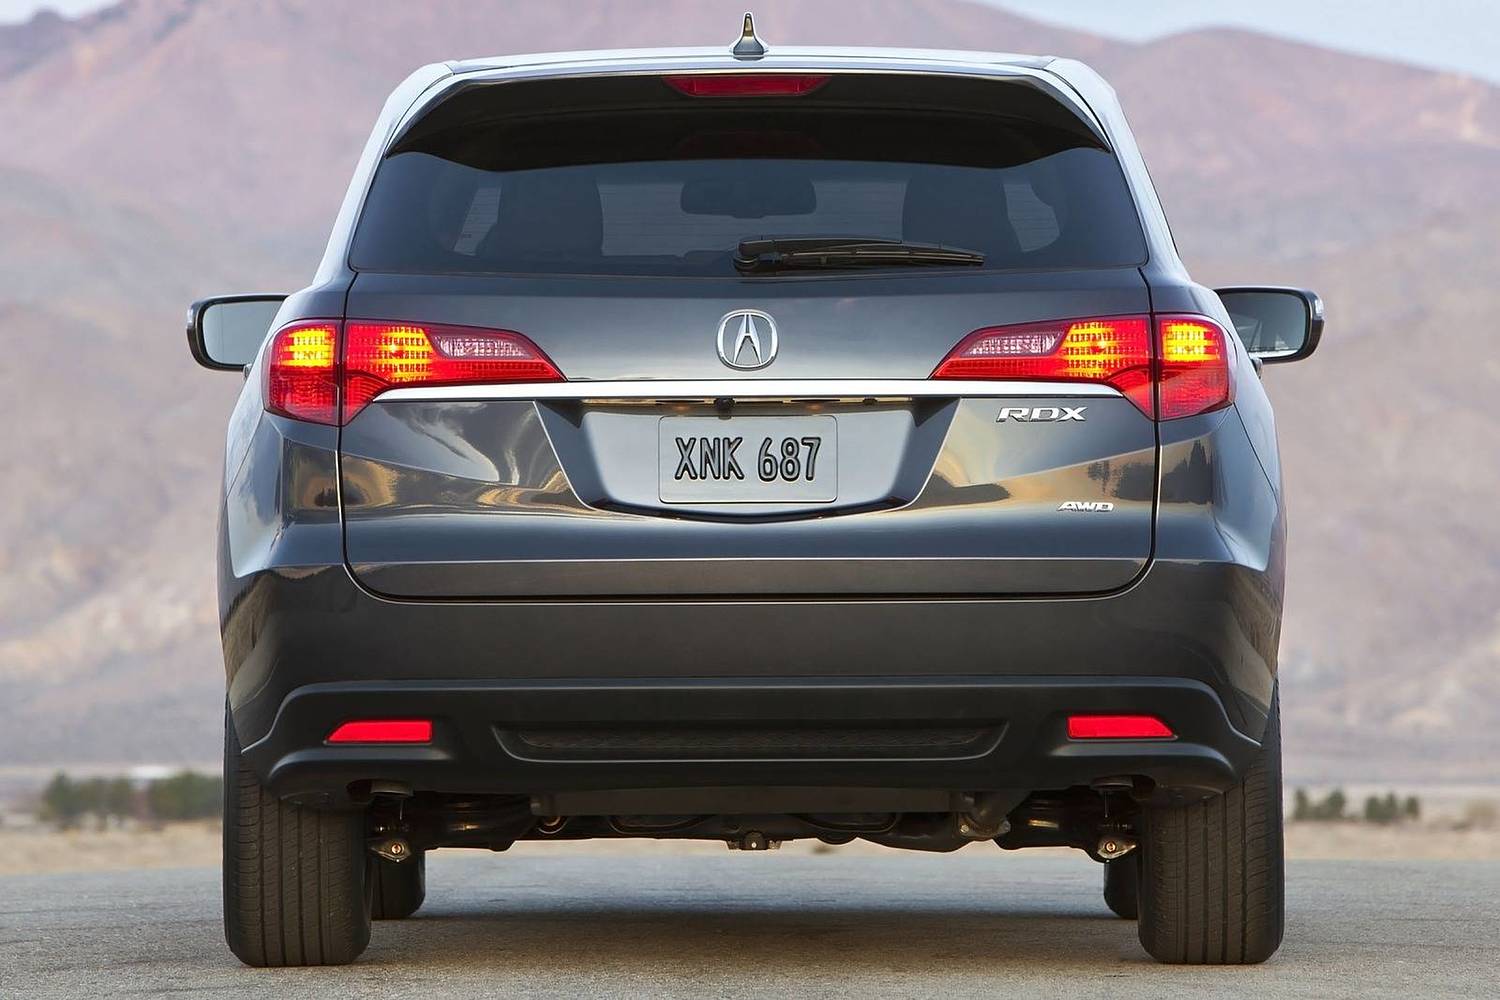 Acura RDX 4dr SUV Exterior (2013 model year shown)